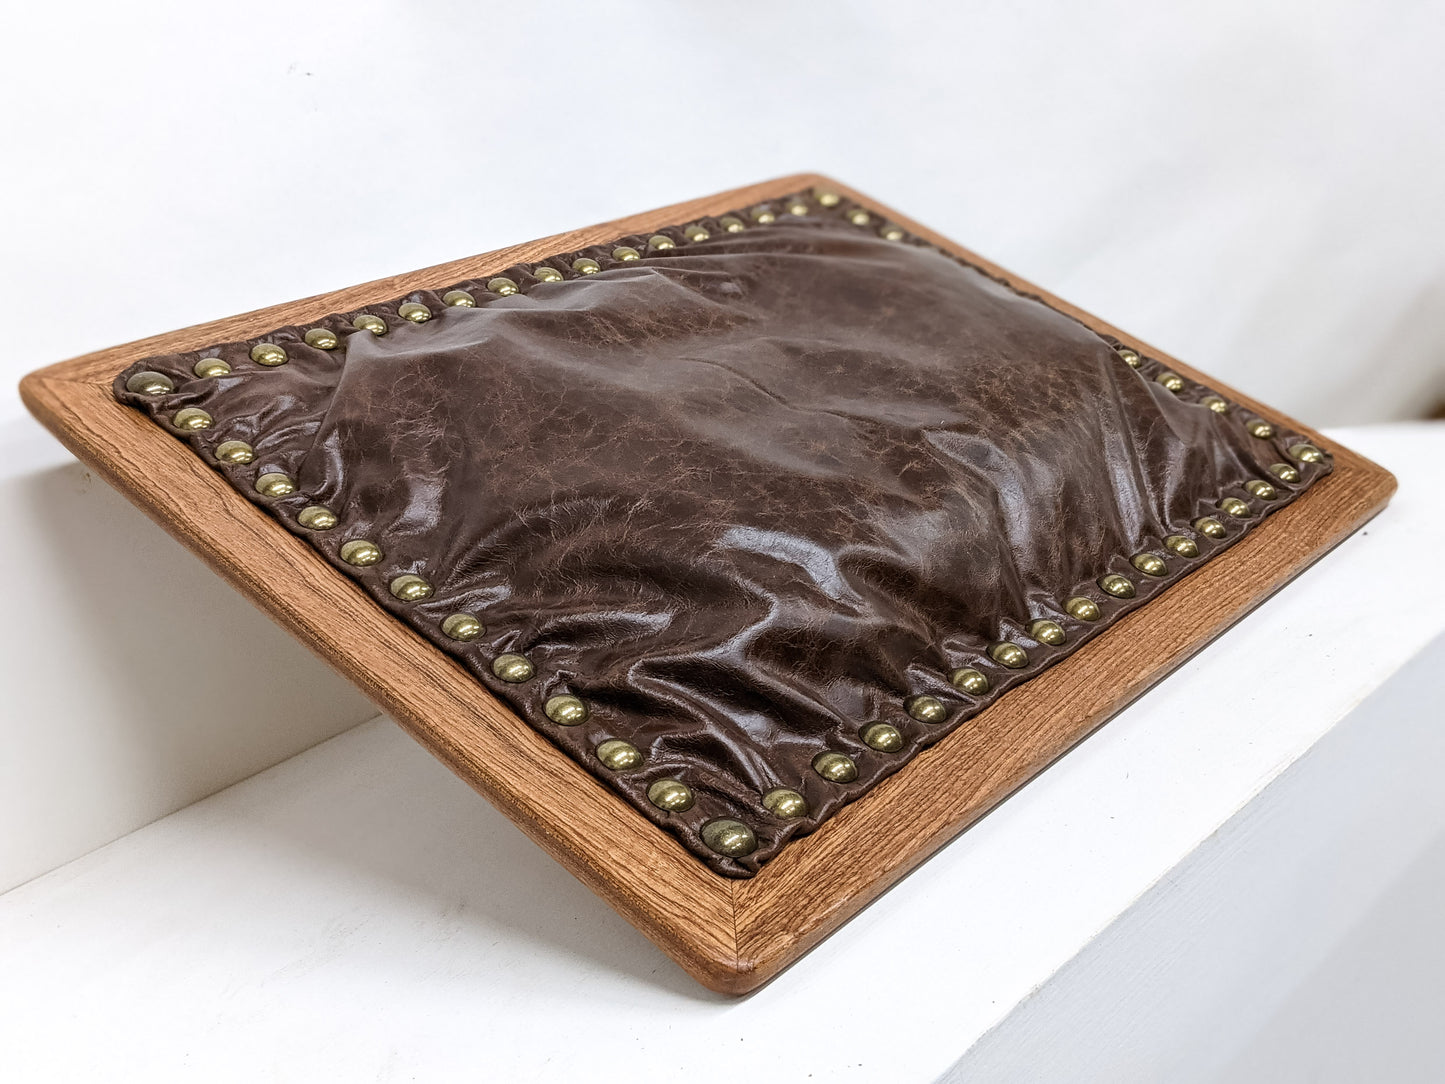 The back of the Leather Cushion Lap Desk is presented. The stuffed cushion is securely pinned to the mahogany wood by large brass pins that frame the cushion. The desk extends just beyond the cushion. 